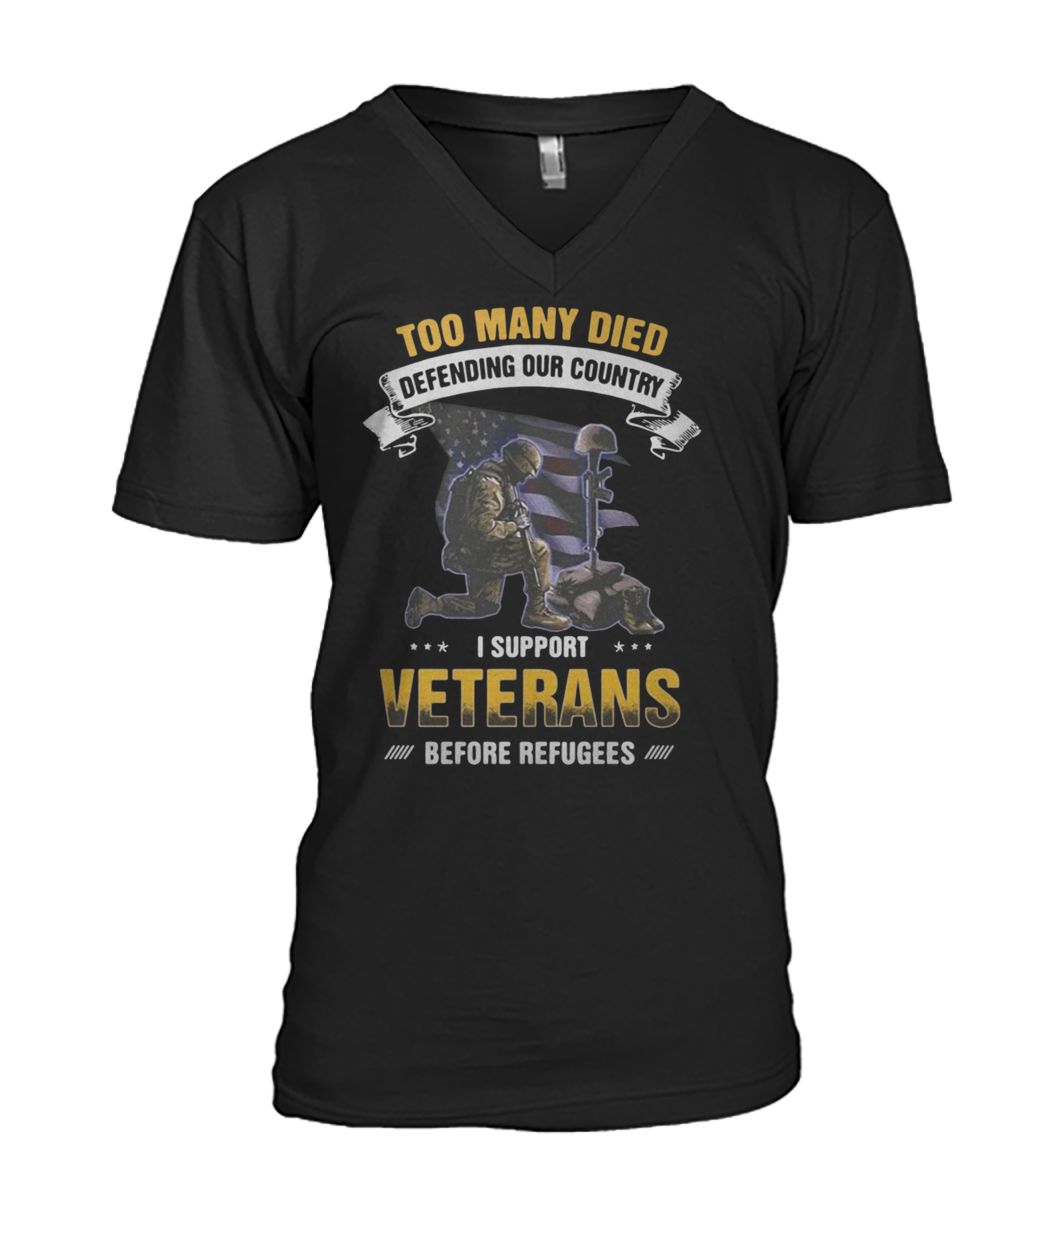 Too many died defending our country I support veterans before refugees mens v-neck